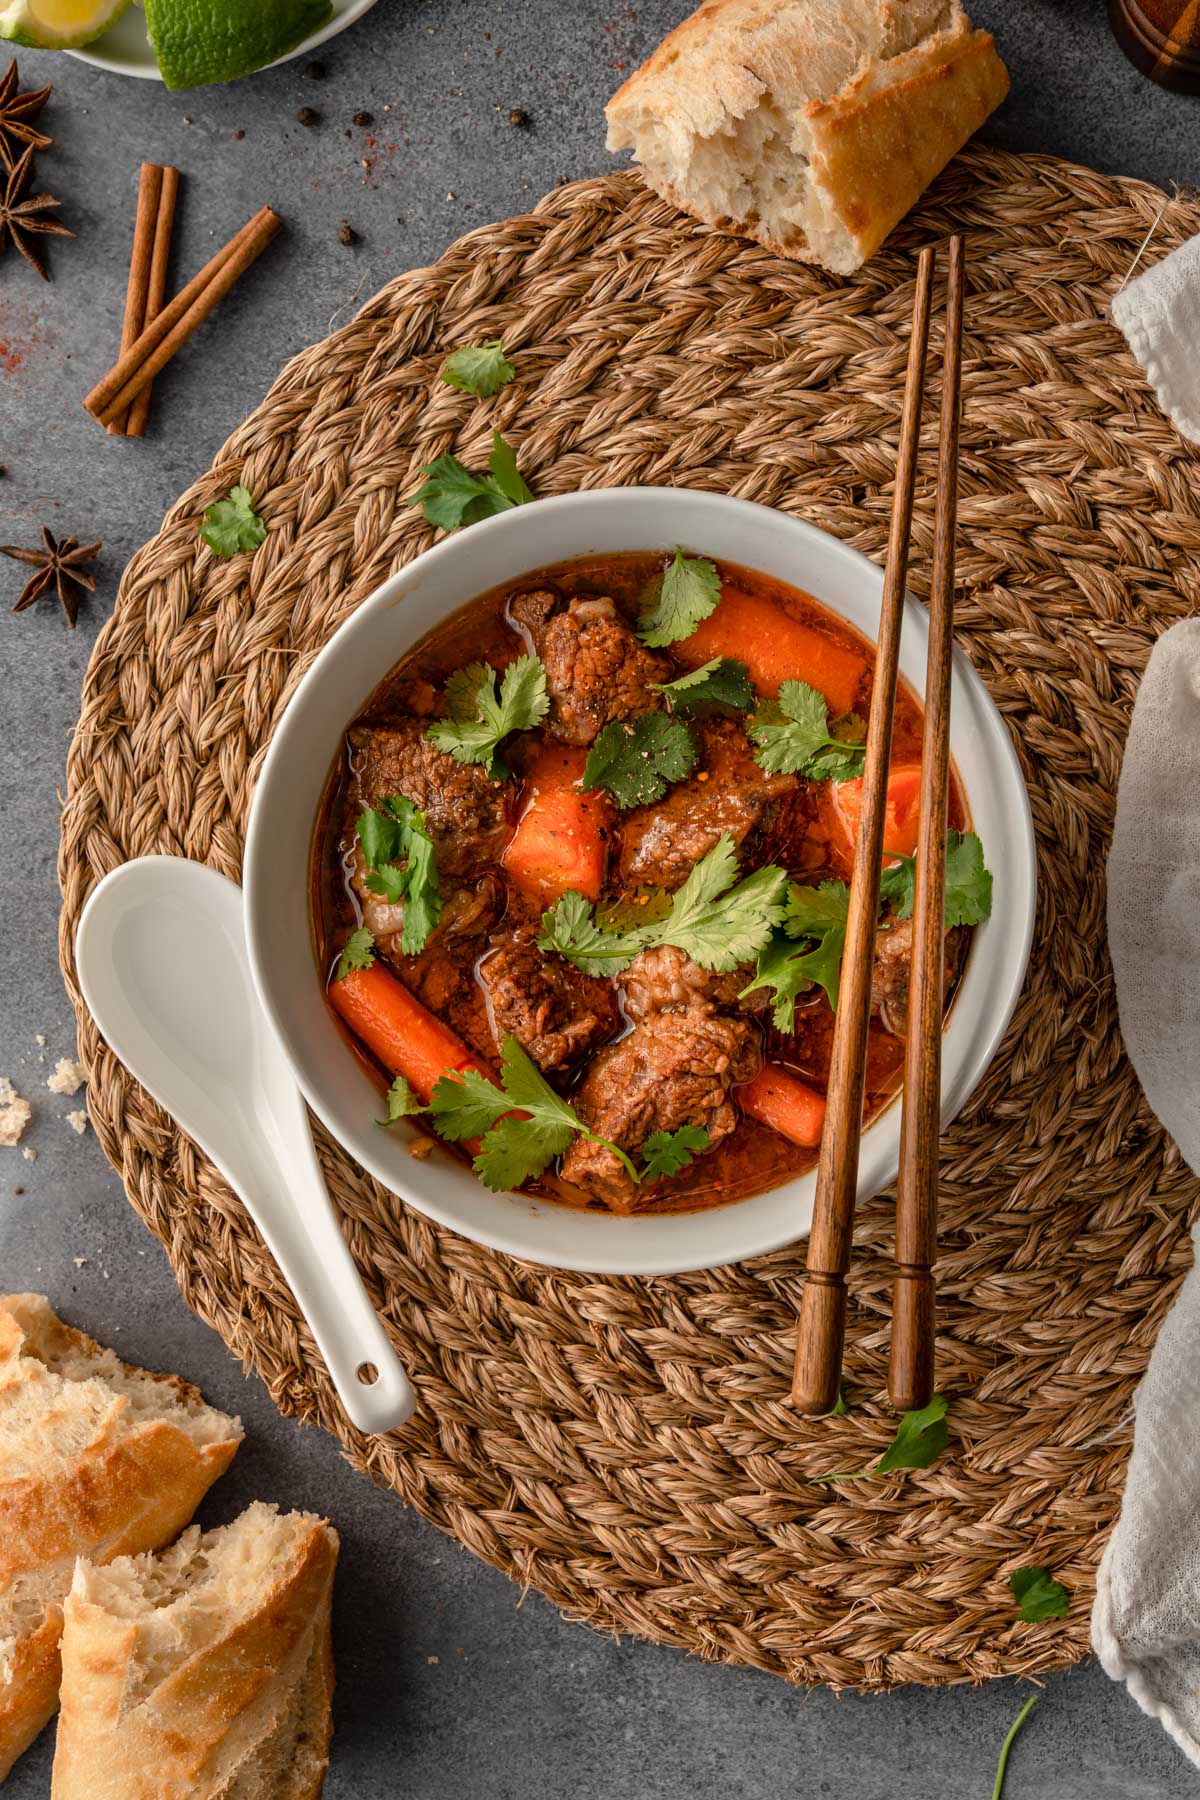 A bowl of Instant Pot Bo kho with wooden chopsticks on a brown placemat and surrounded by bread, spices, and a linen.